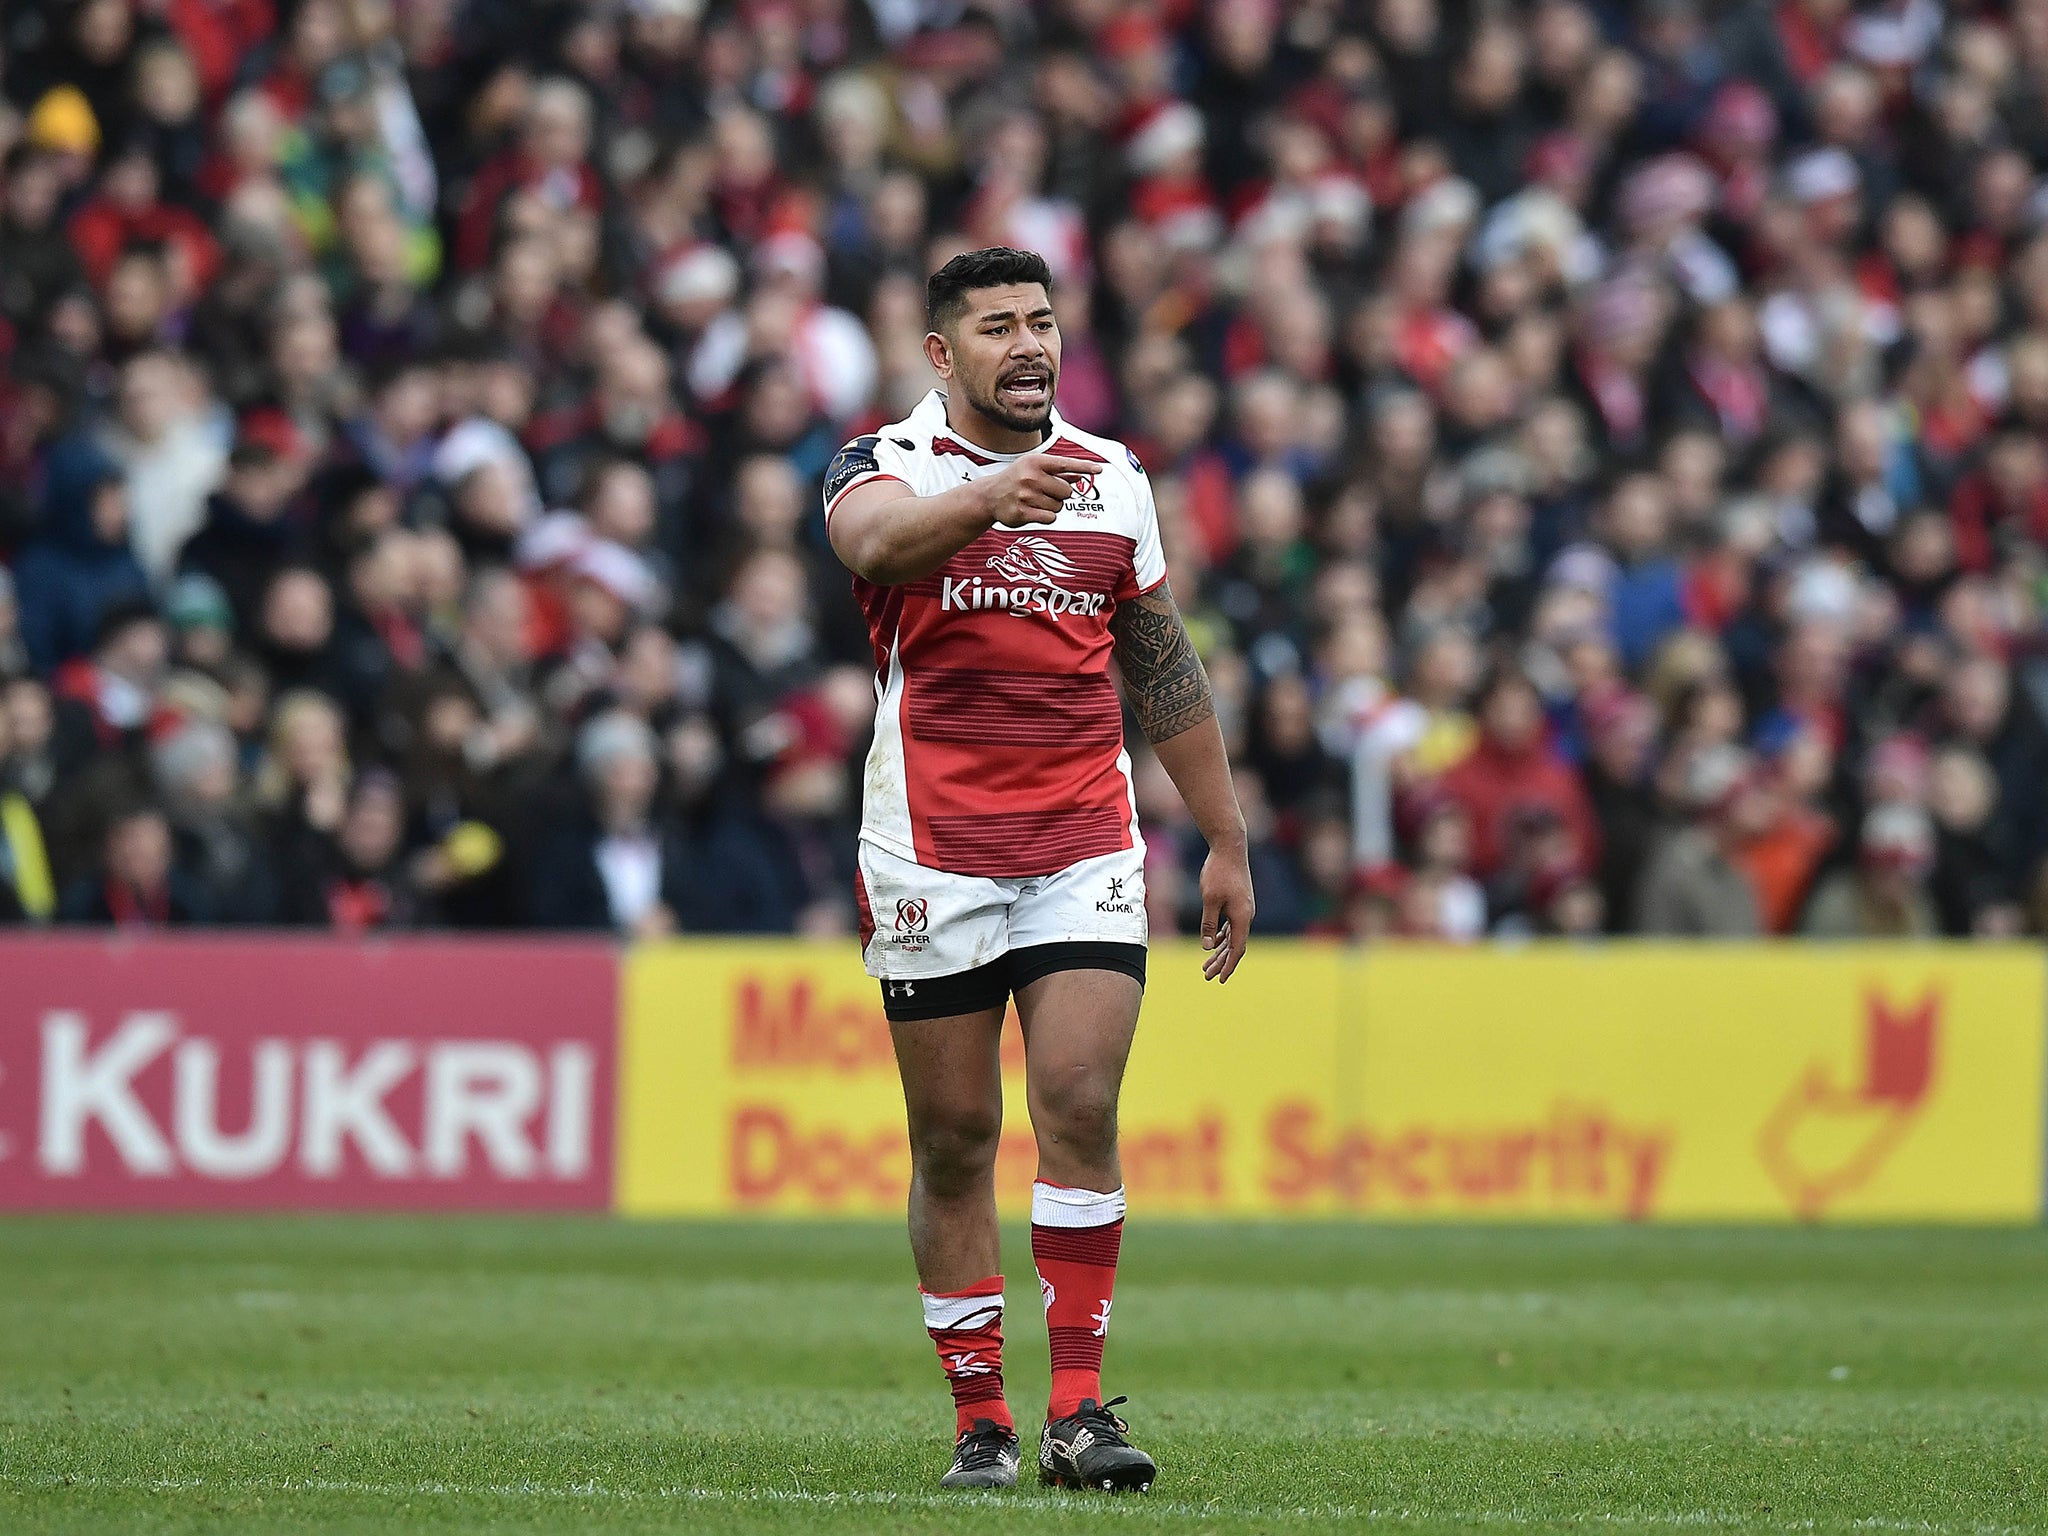 Charles Piutatu will arrive at the club from Ulster this summer